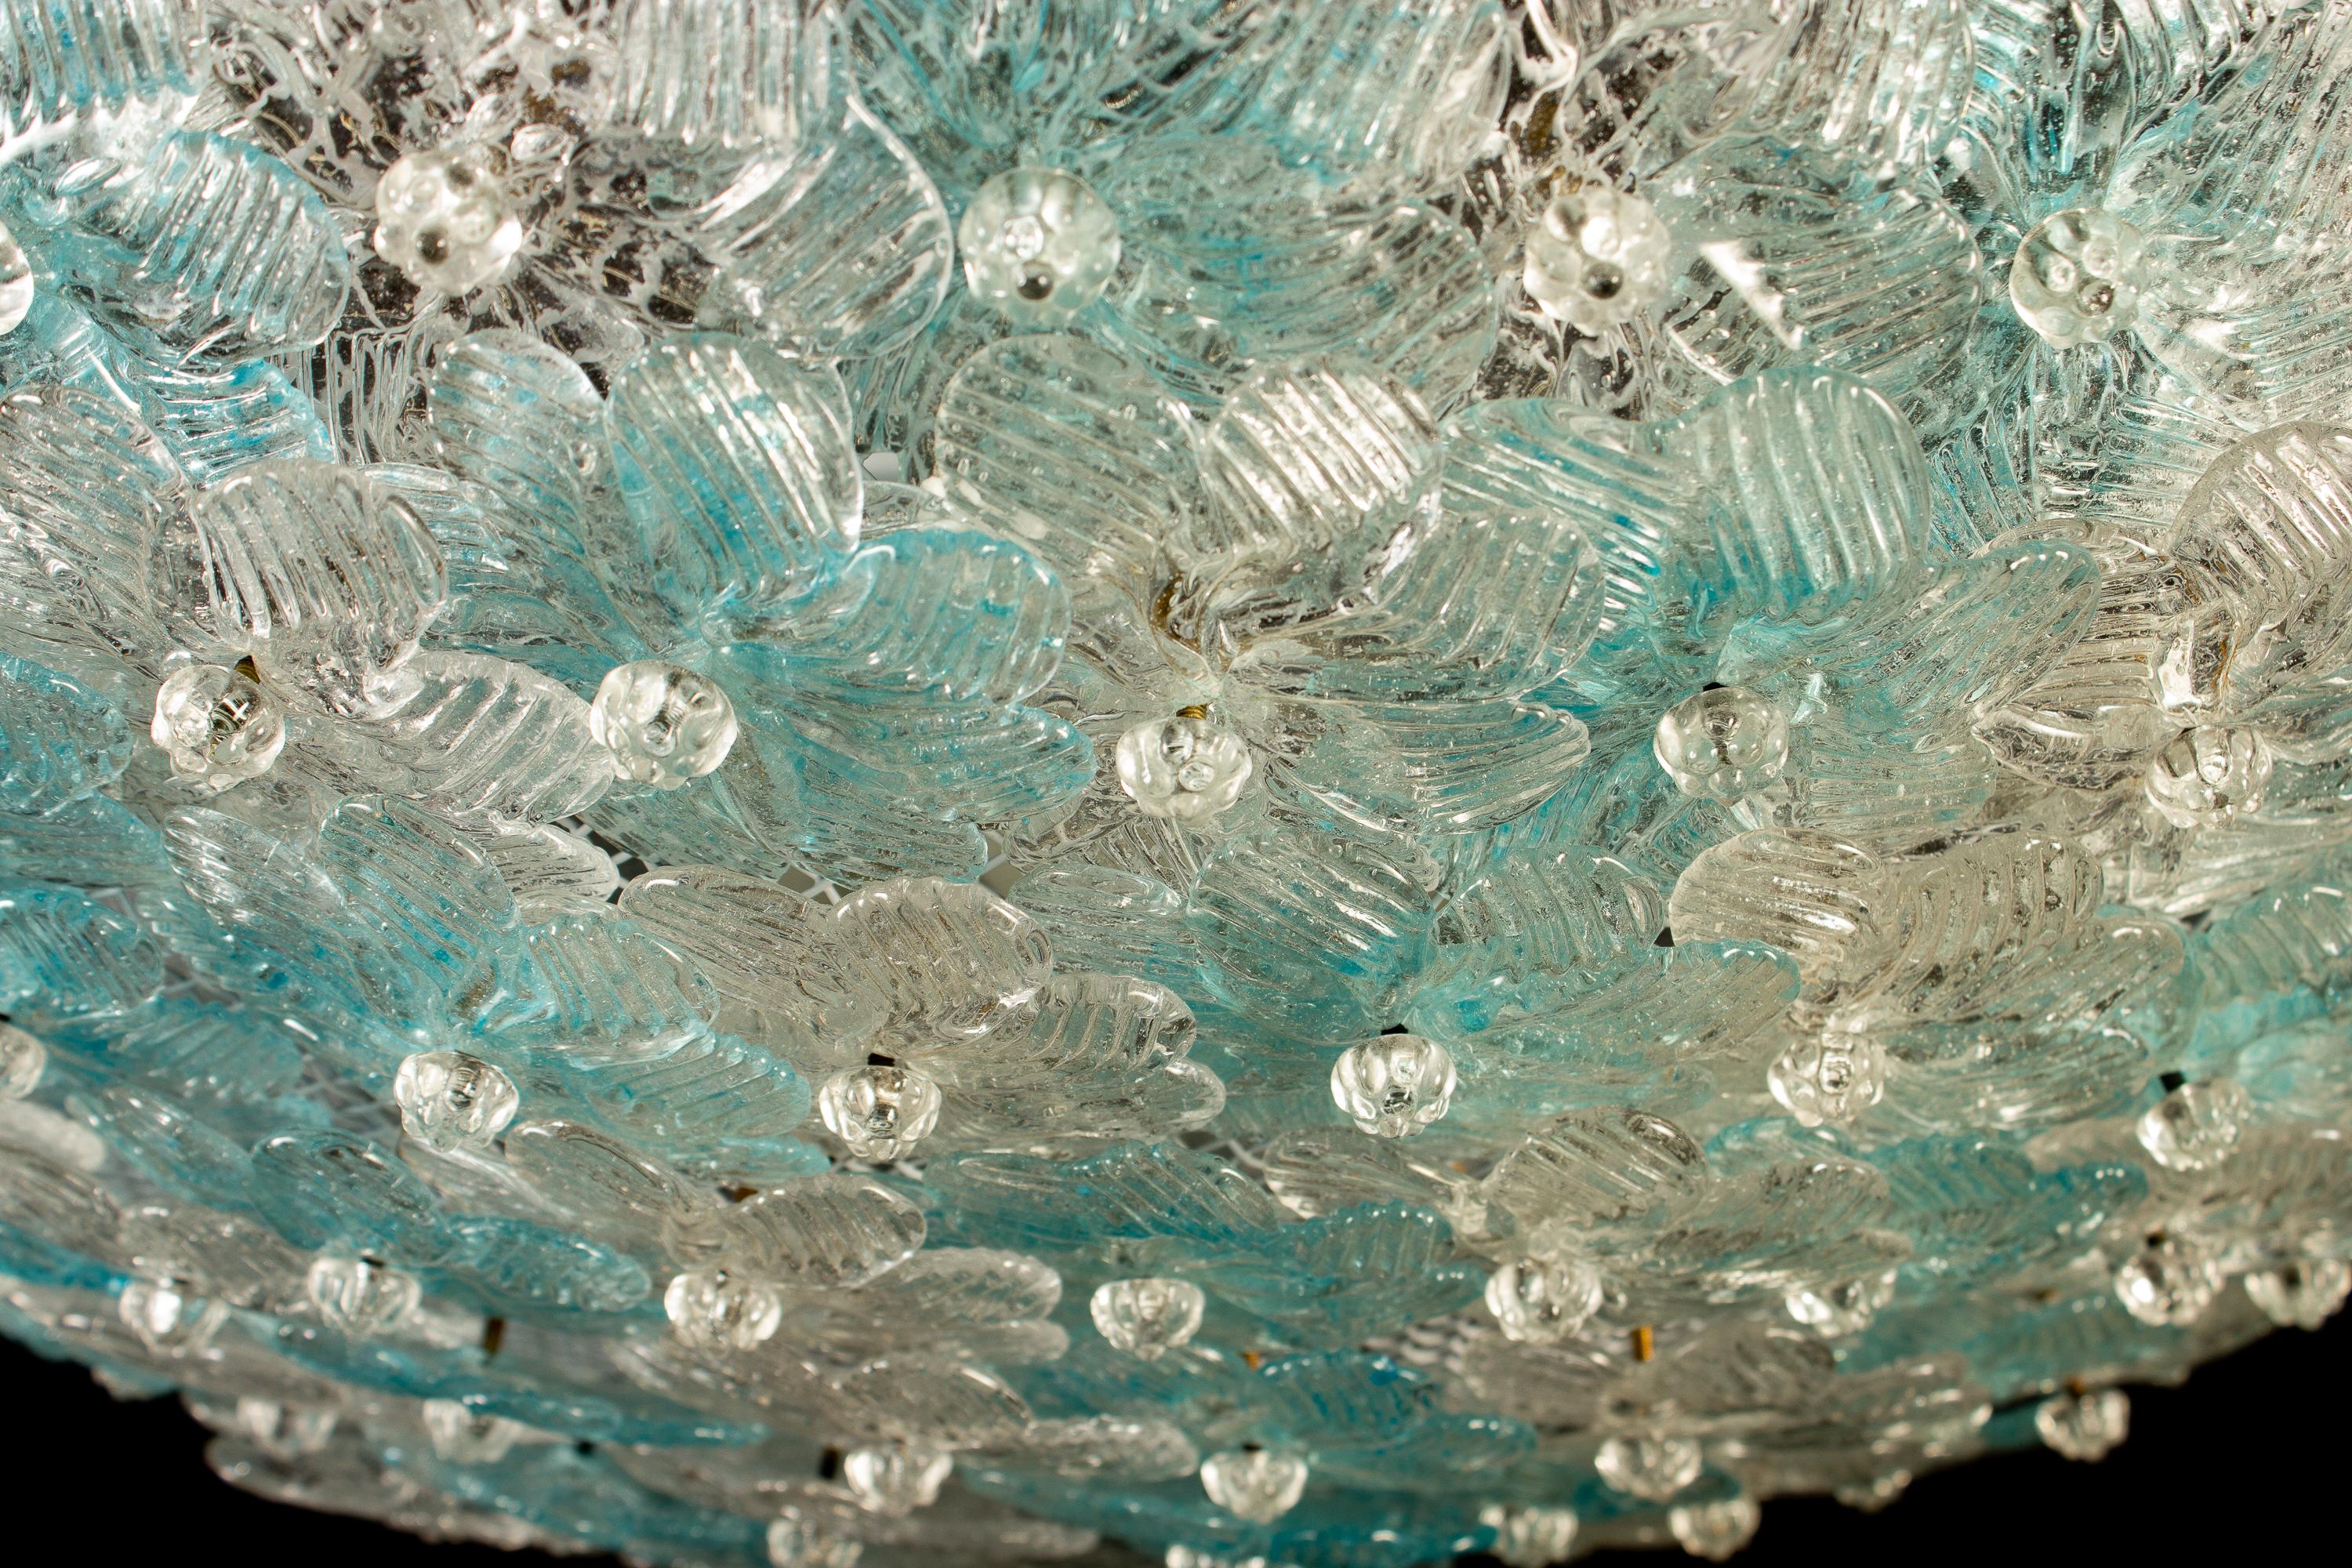 Mid-Century Modern Aquamarine and Ice Murano Glass Flowers Basket Ceiling Light by Barovier & Toso For Sale